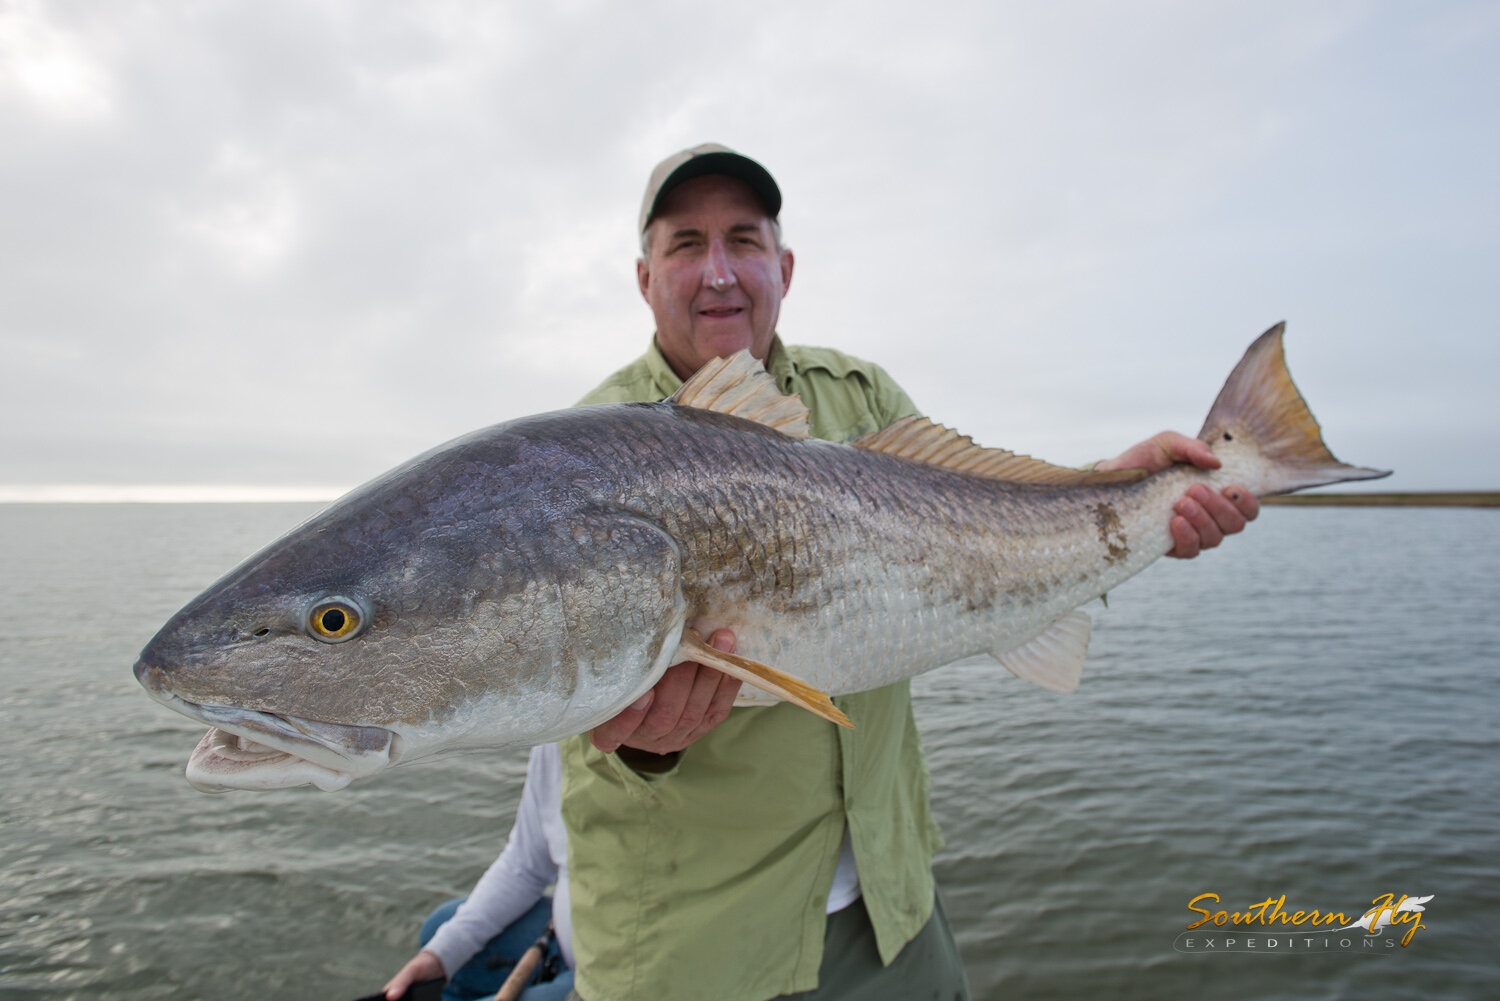 2020-01-16_SouthernFlyExpeditions_NewOrleans_RickCrivelloneAndMikePurcell-7.jpg